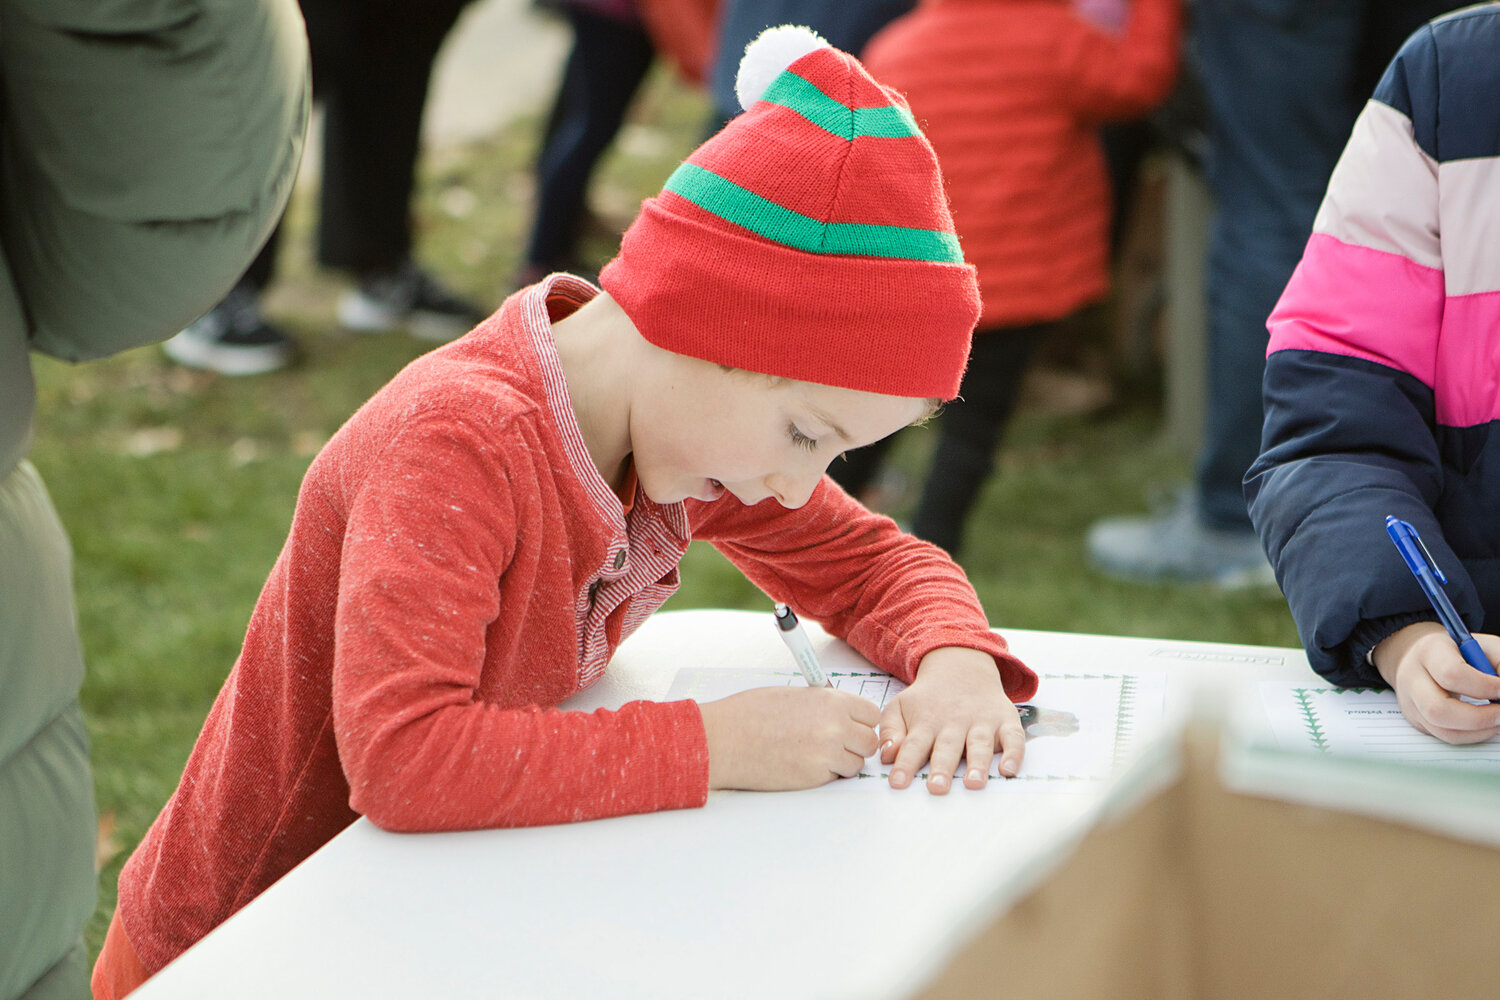 Charlie Vestal writes a letter to Santa during the town’s annual tree-lighting event on Saturday, Dec. 2.